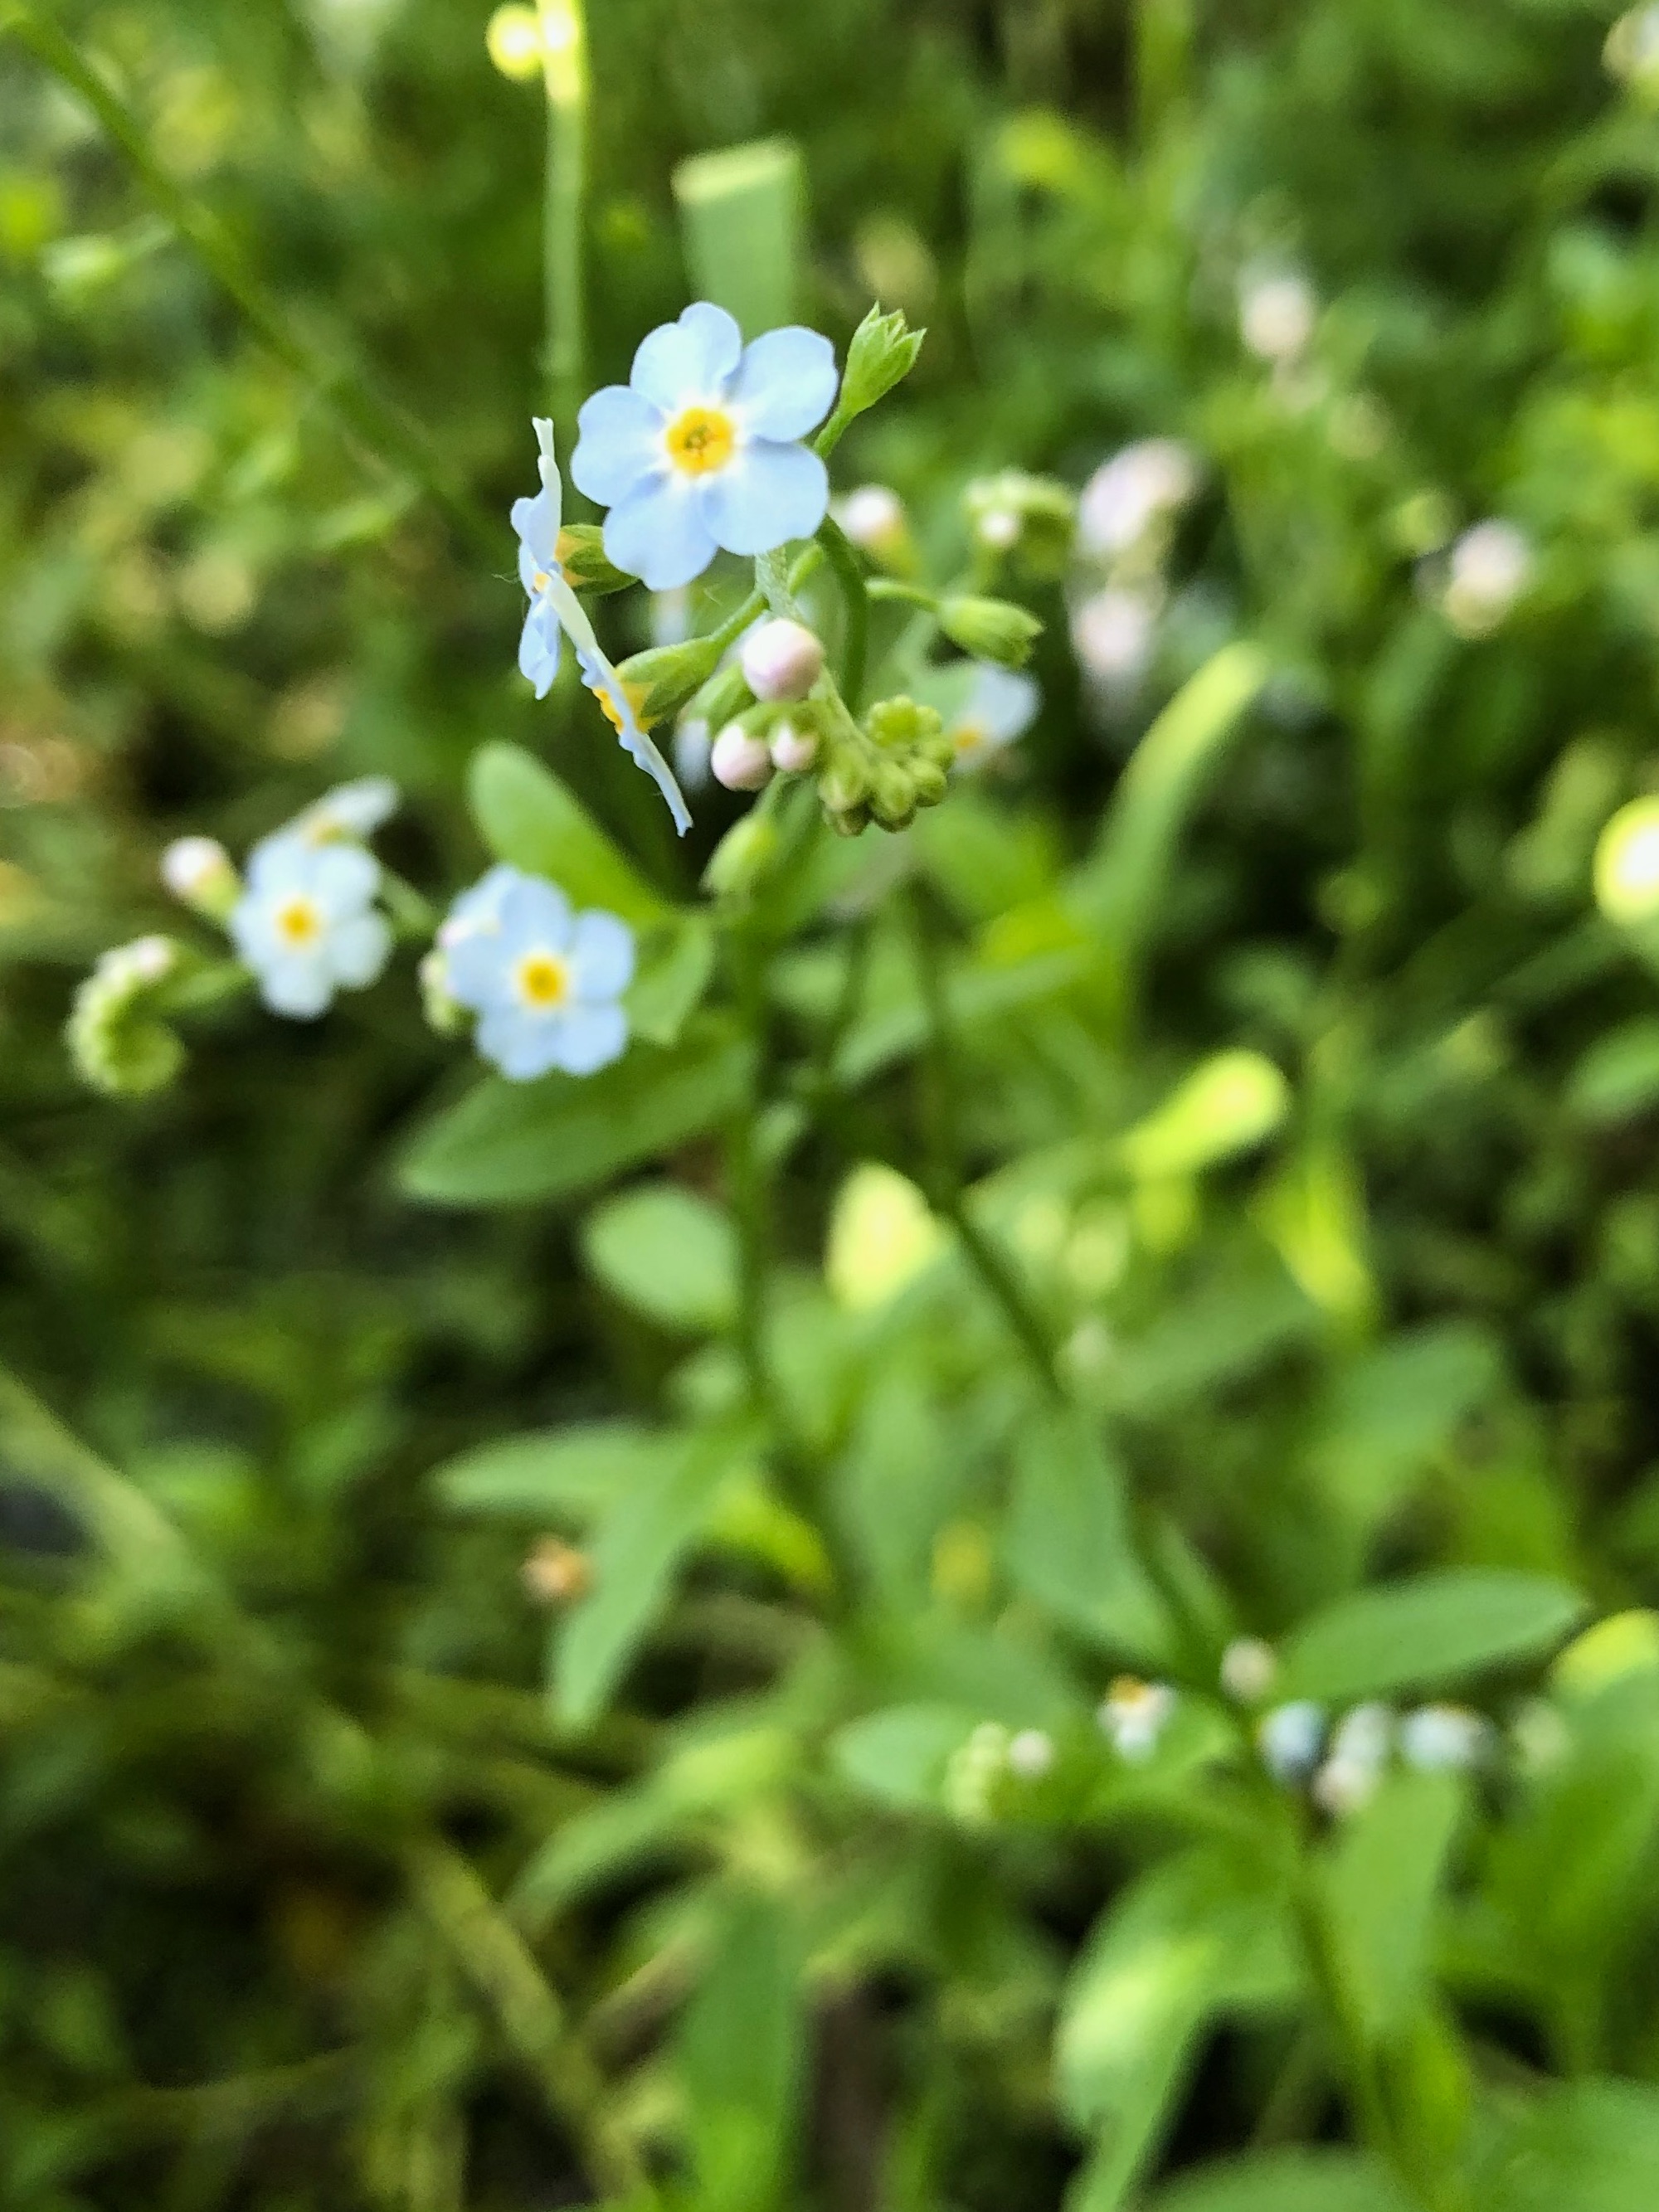 True Forget-me-not near cattails at Pickford Street stormwater outflow into Lake Wingra in Madison, Wisconsin on June 13, 2020.